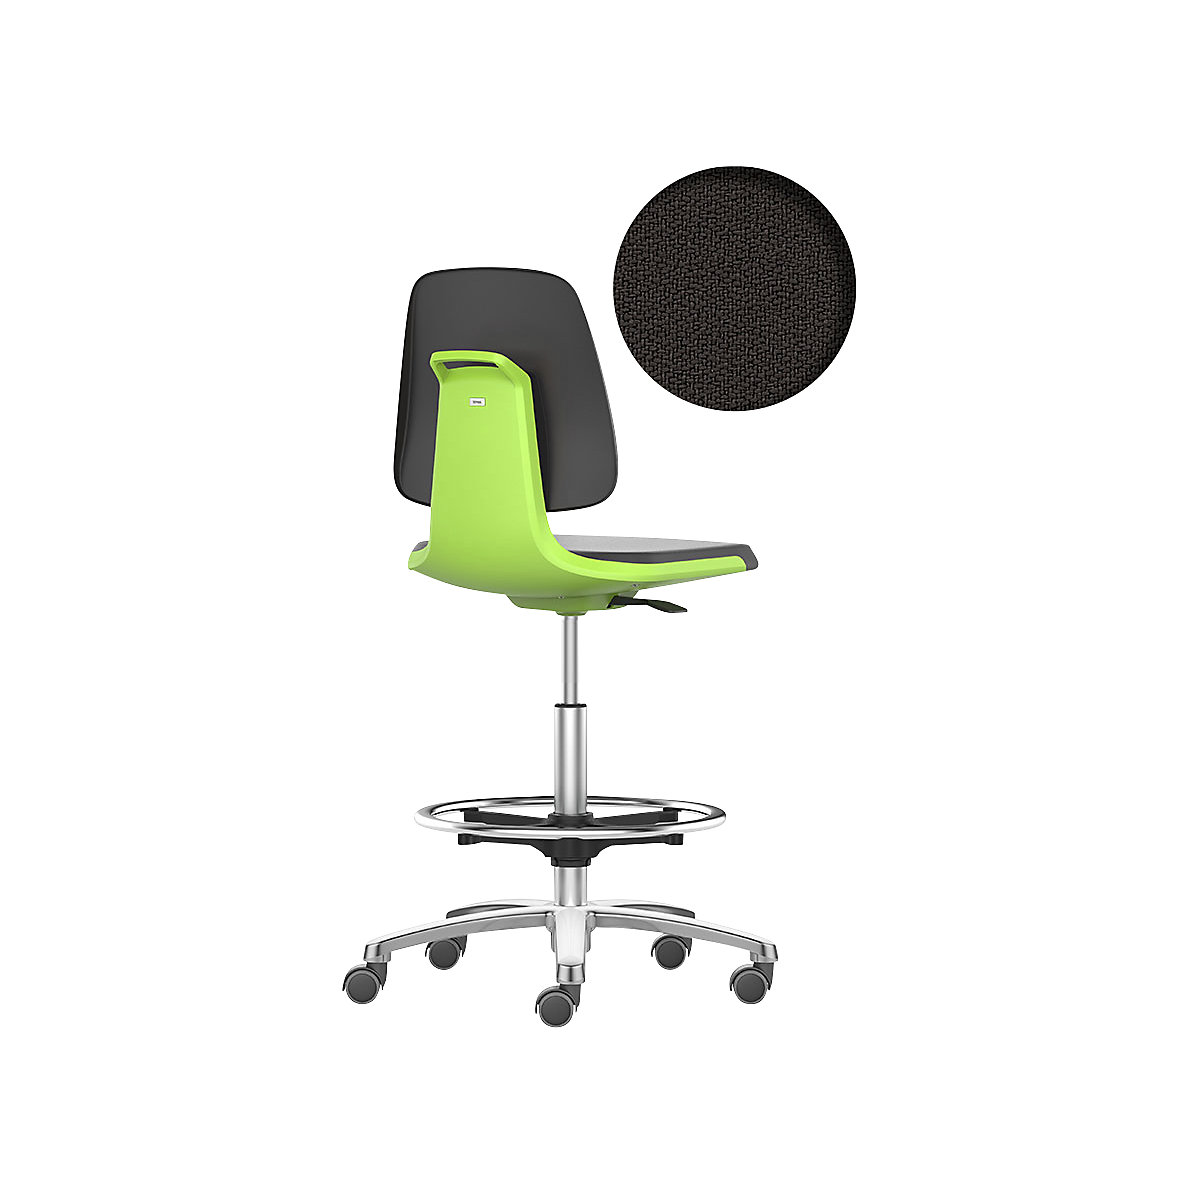 LABSIT industrial swivel chair – bimos, high chair with sit-stop castors and foot ring, fabric upholstered seat, green-27